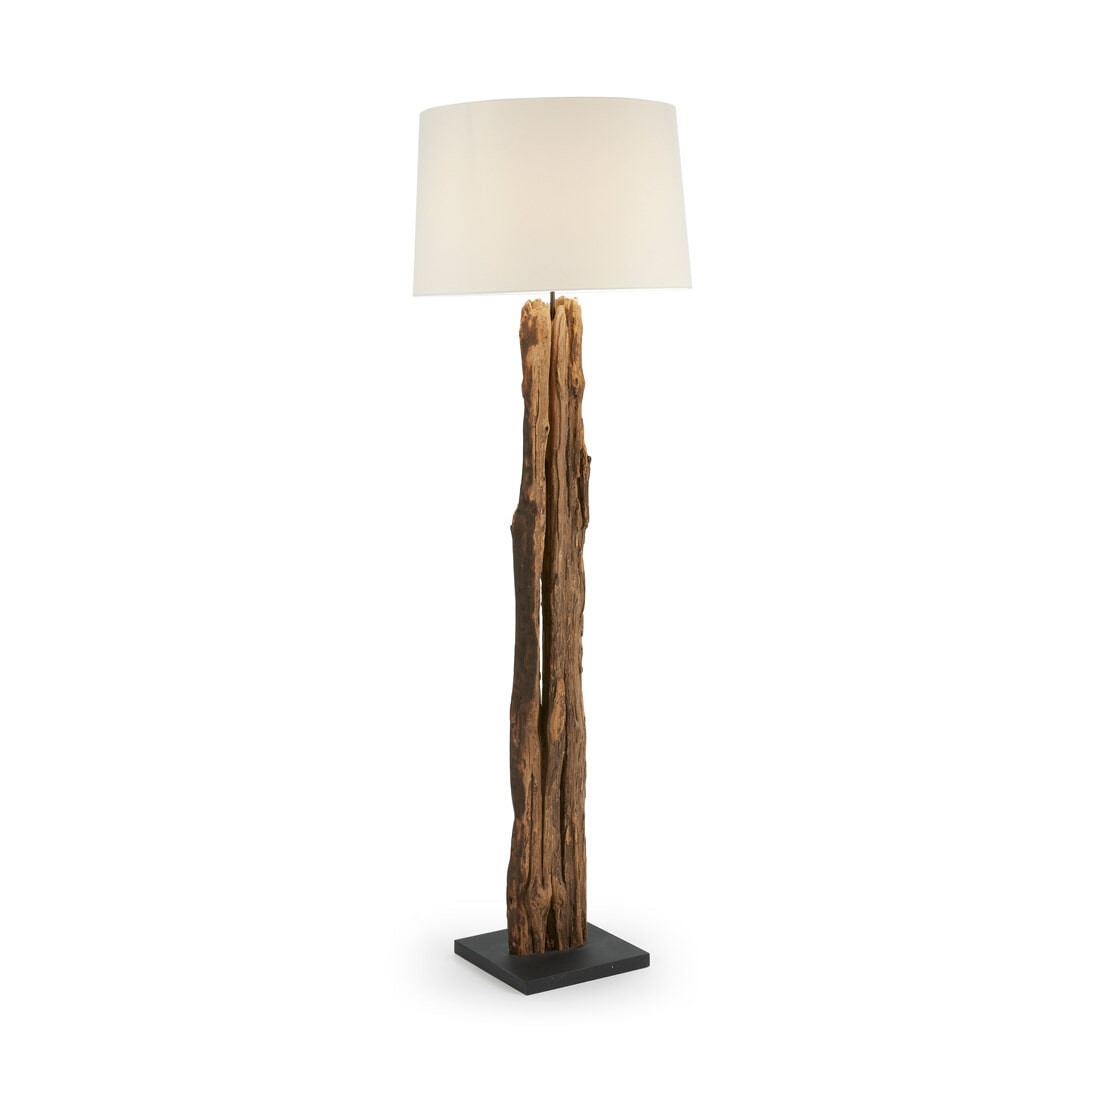 Kave Home Vloerlamp Powell - Wit